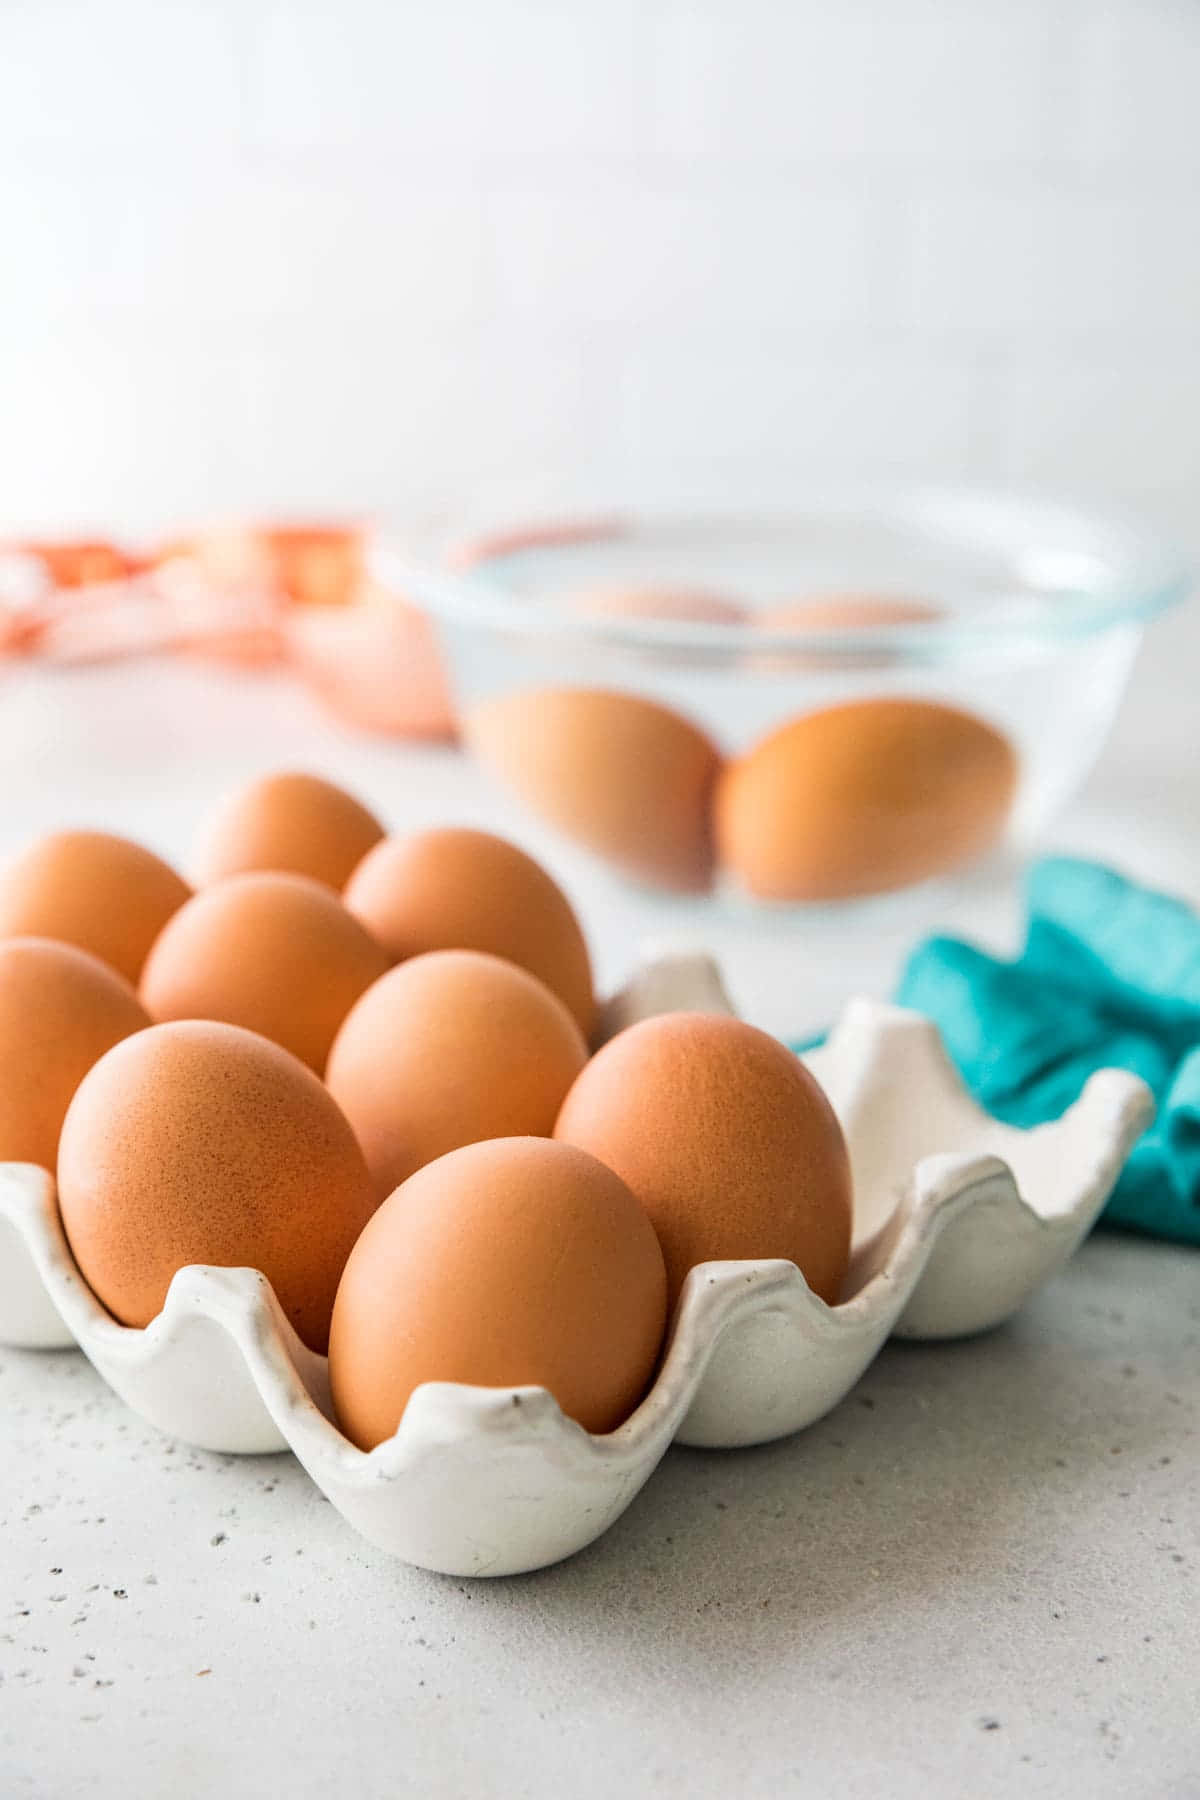 "Farm-fresh eggs, ready to be cooked in any way you like!"